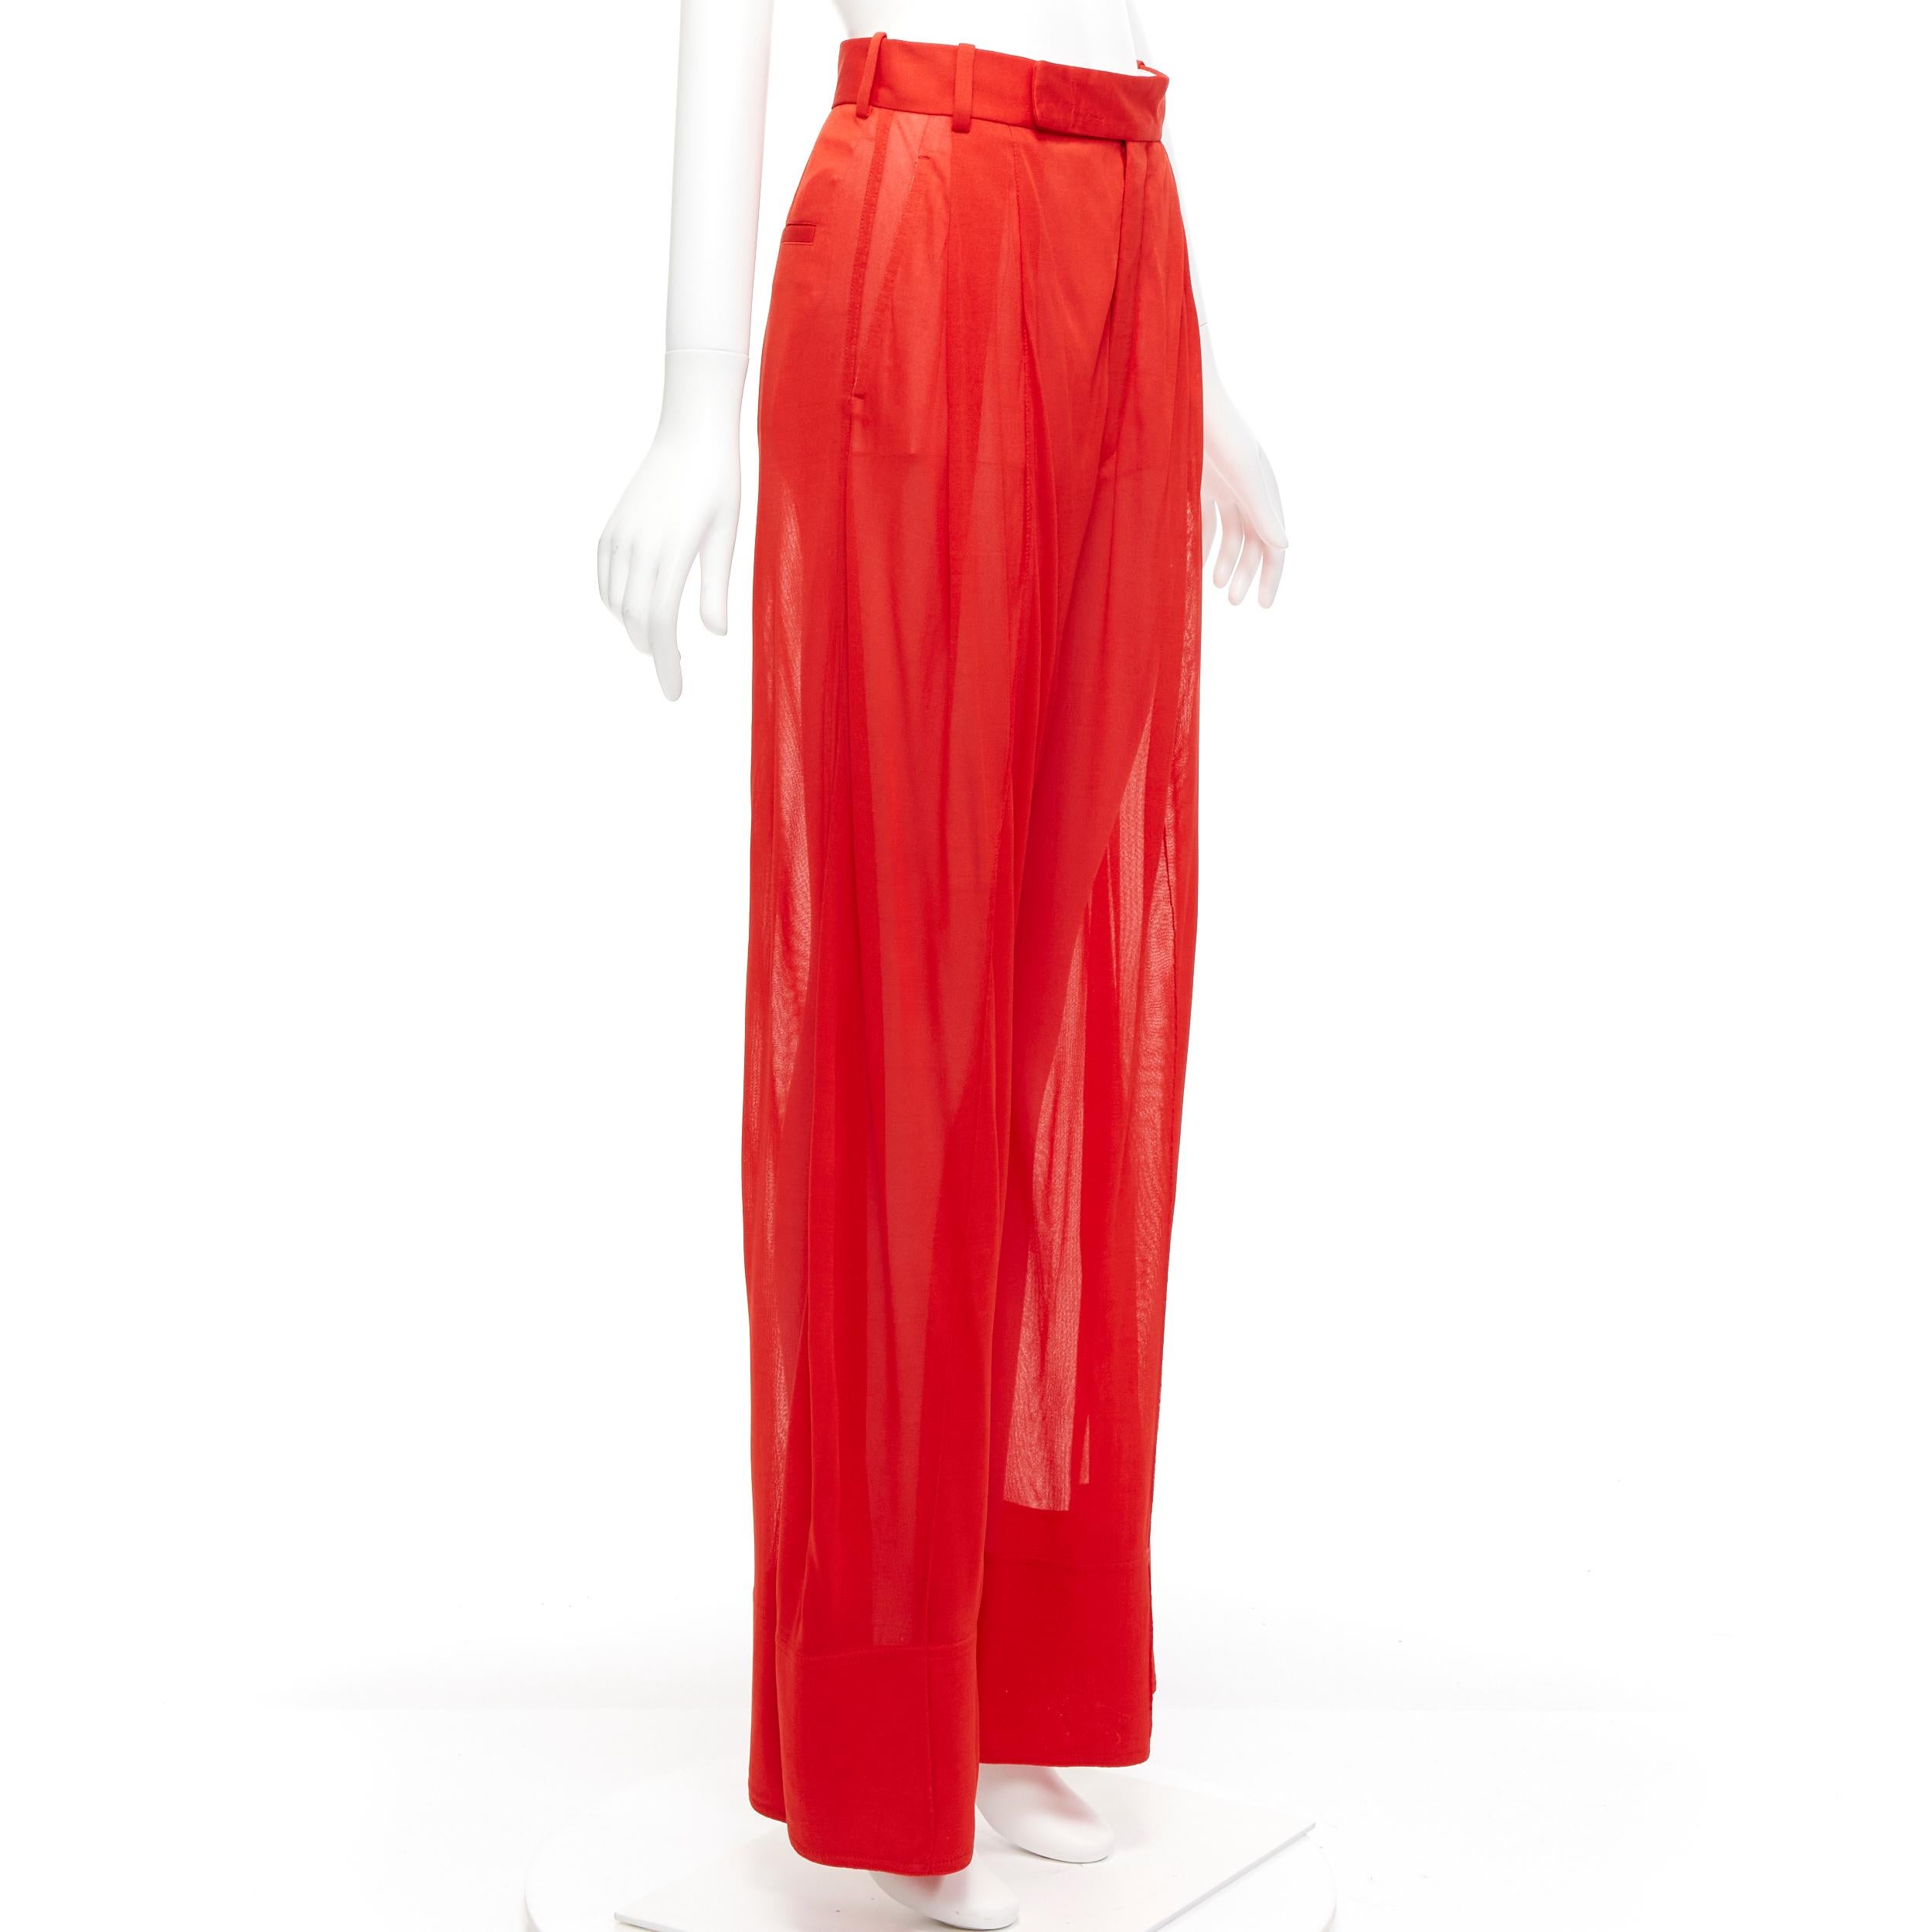 OLD CELINE Phoebe Philo red sheer solid seam wide leg pants FR36 S
Reference: TGAS/D01149
Brand: Celine
Designer: Phoebe Philo
Material: Viscose
Color: Red
Pattern: Solid
Closure: Zip Fly
Lining: Cotton
Extra Details: Partially lined with